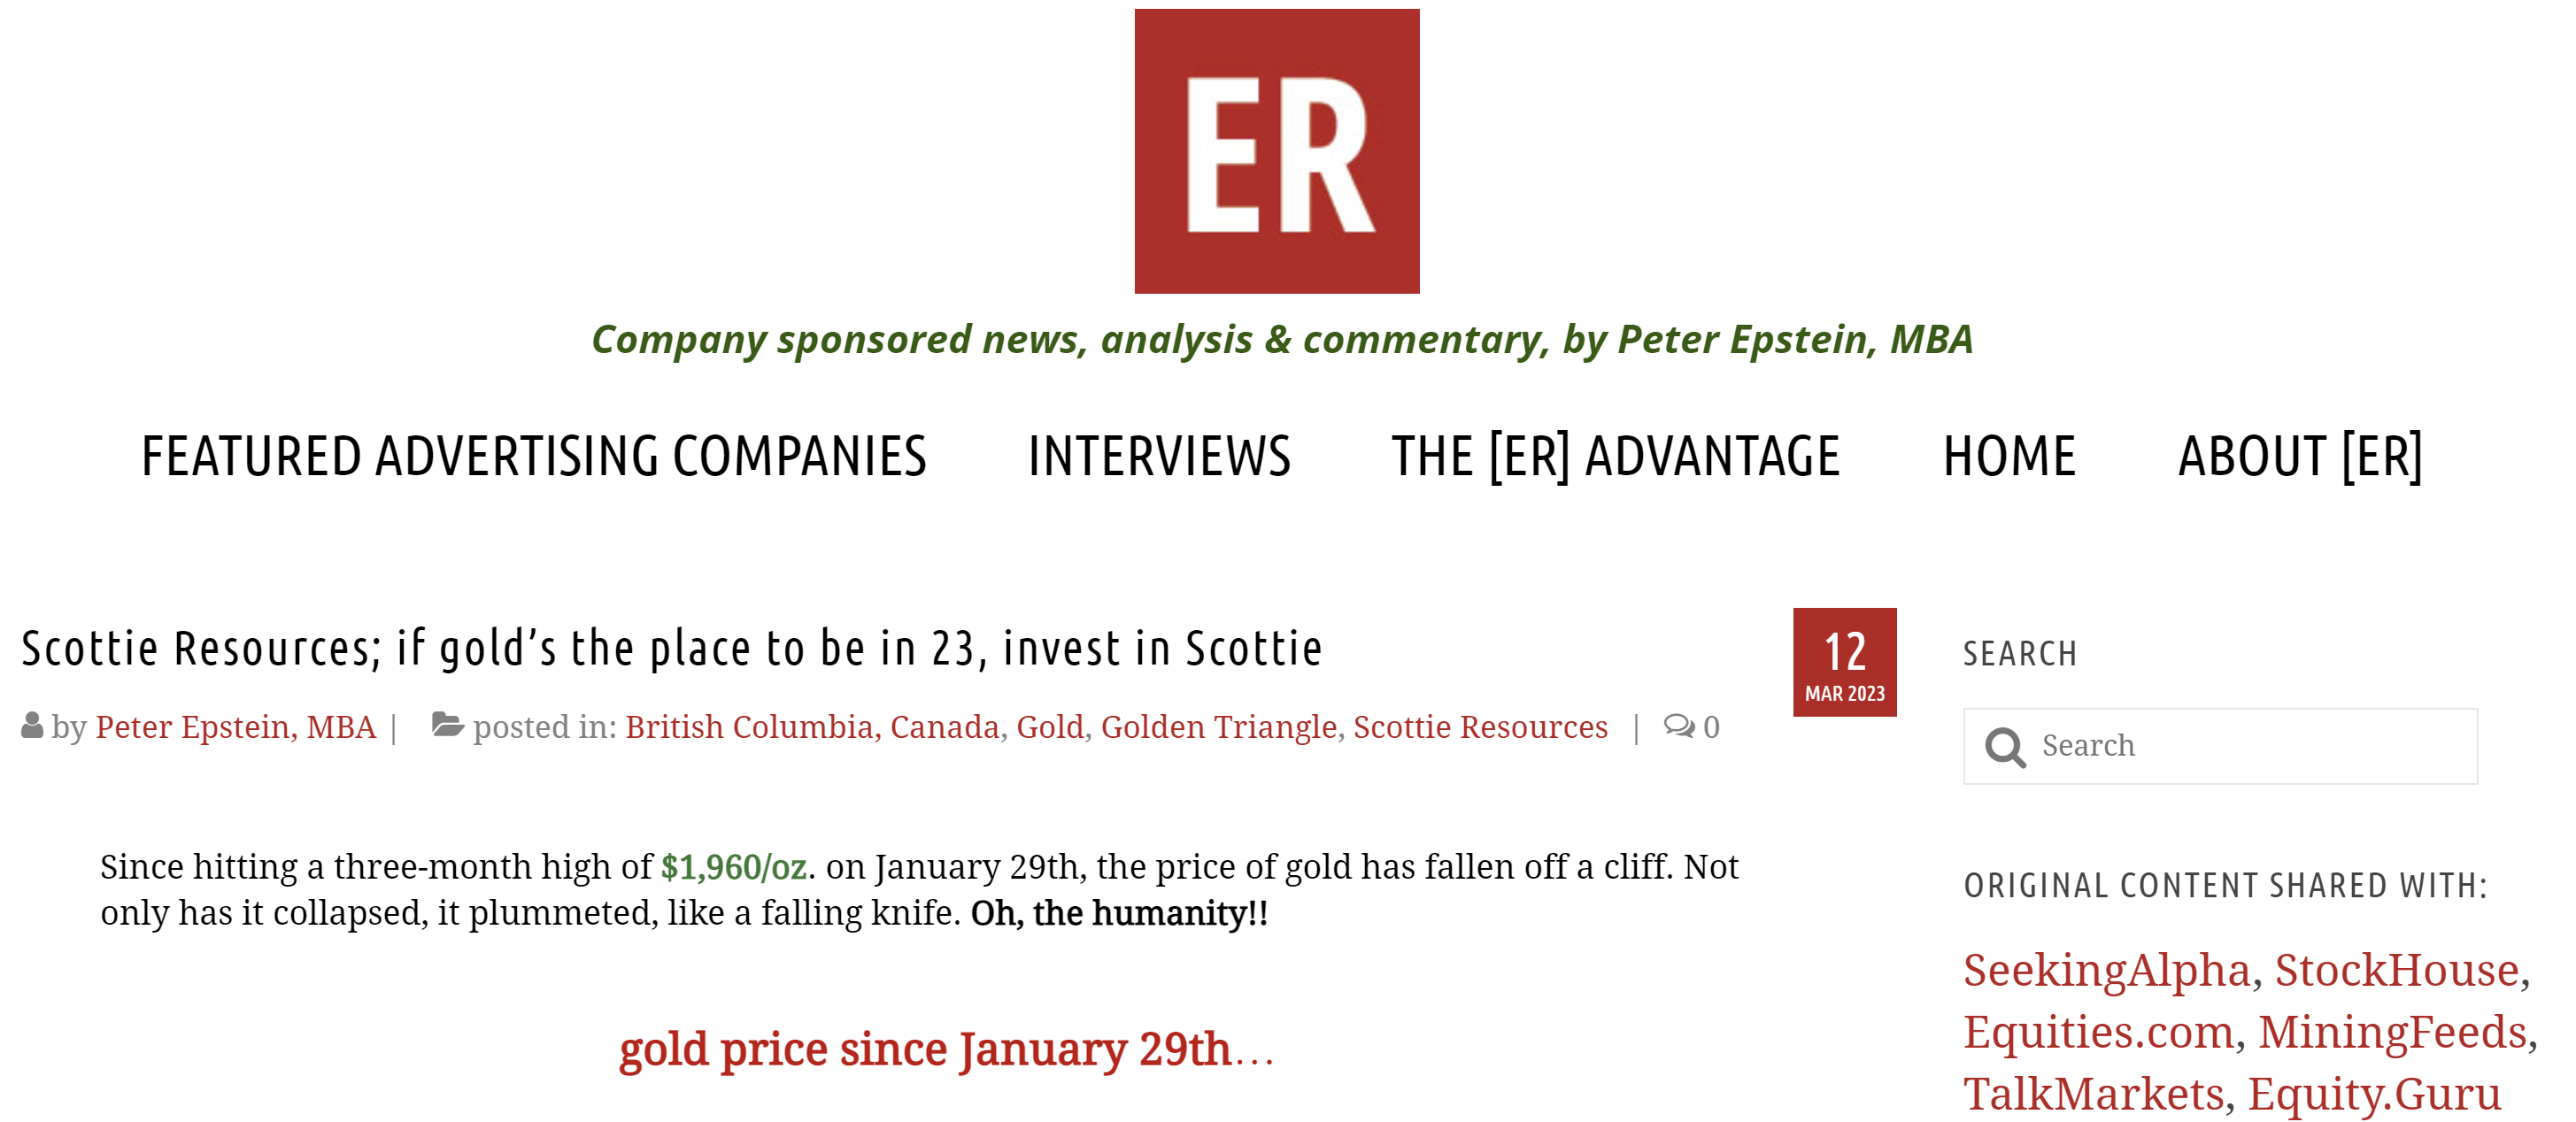 Epstein Research - Scottie Resources; if gold’s the place to be in 23, invest in Scottie